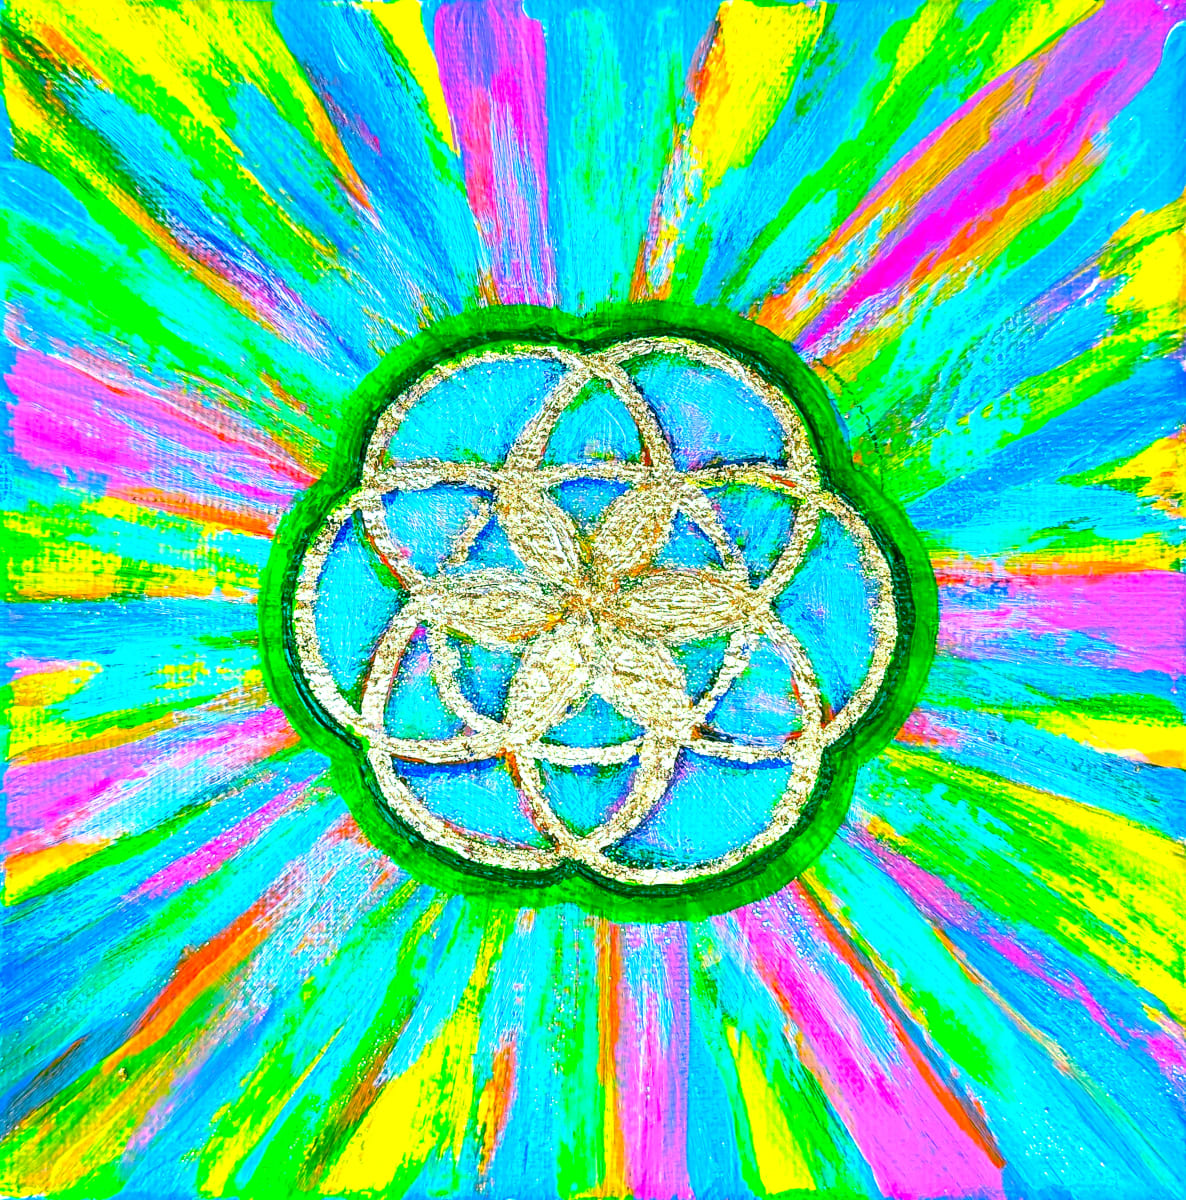 Radiate Peace by Roshni Patel  Image: "Radiate Peace" is part of a mini-series of three paintings that explore the theme of illumination. It is a visual representation of spreading peace and tranquility. It encourages us to cultivate inner peace within ourselves and radiate it outward, creating a harmonious environment both within and around us. This piece reminds us of the inherent power we hold to bring about positive change through our own inner peace and the ripple effect it creates within the universe. 

At the center of the painting, the seed of life symbol, crafted with gold leaf, symbolizes the interconnection of life on Earth and universal existence. Multicolored rays of paint strokes surround this symbol, with blue as the dominant color, symbolizing calmness, inner peace, serenity, and the soul. 